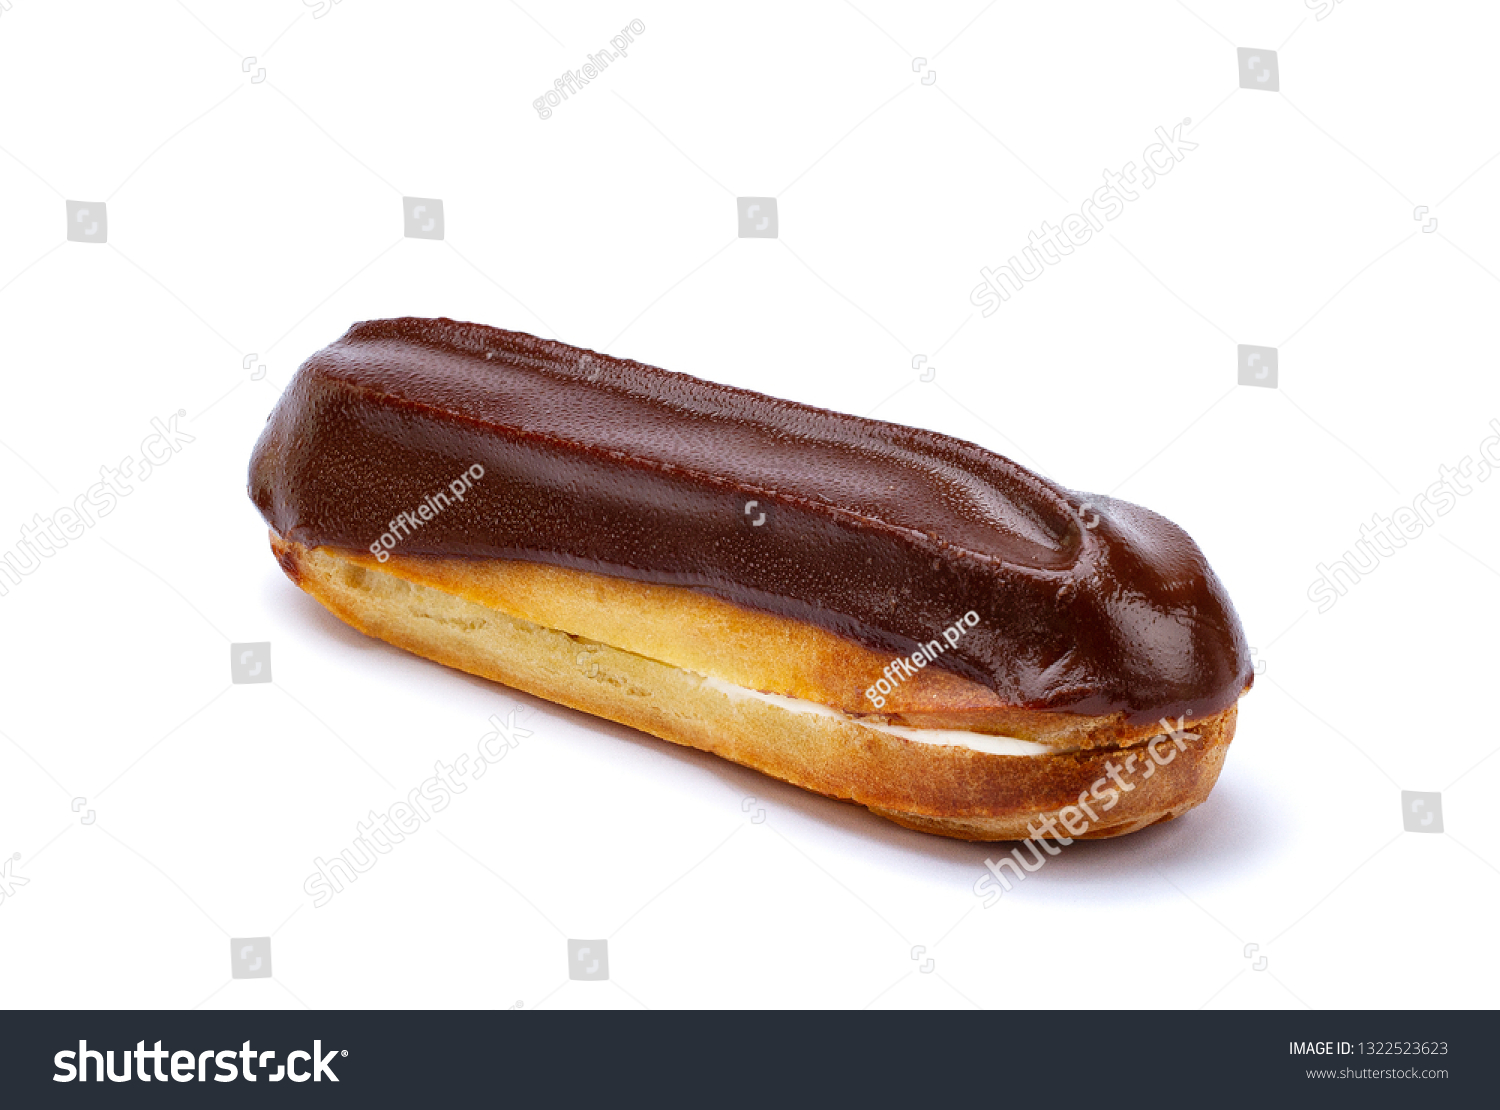 Traditional french dessert. Isolated eclair with custard and chocolate icing on white background. Pastry products for sweet tooth  #1322523623